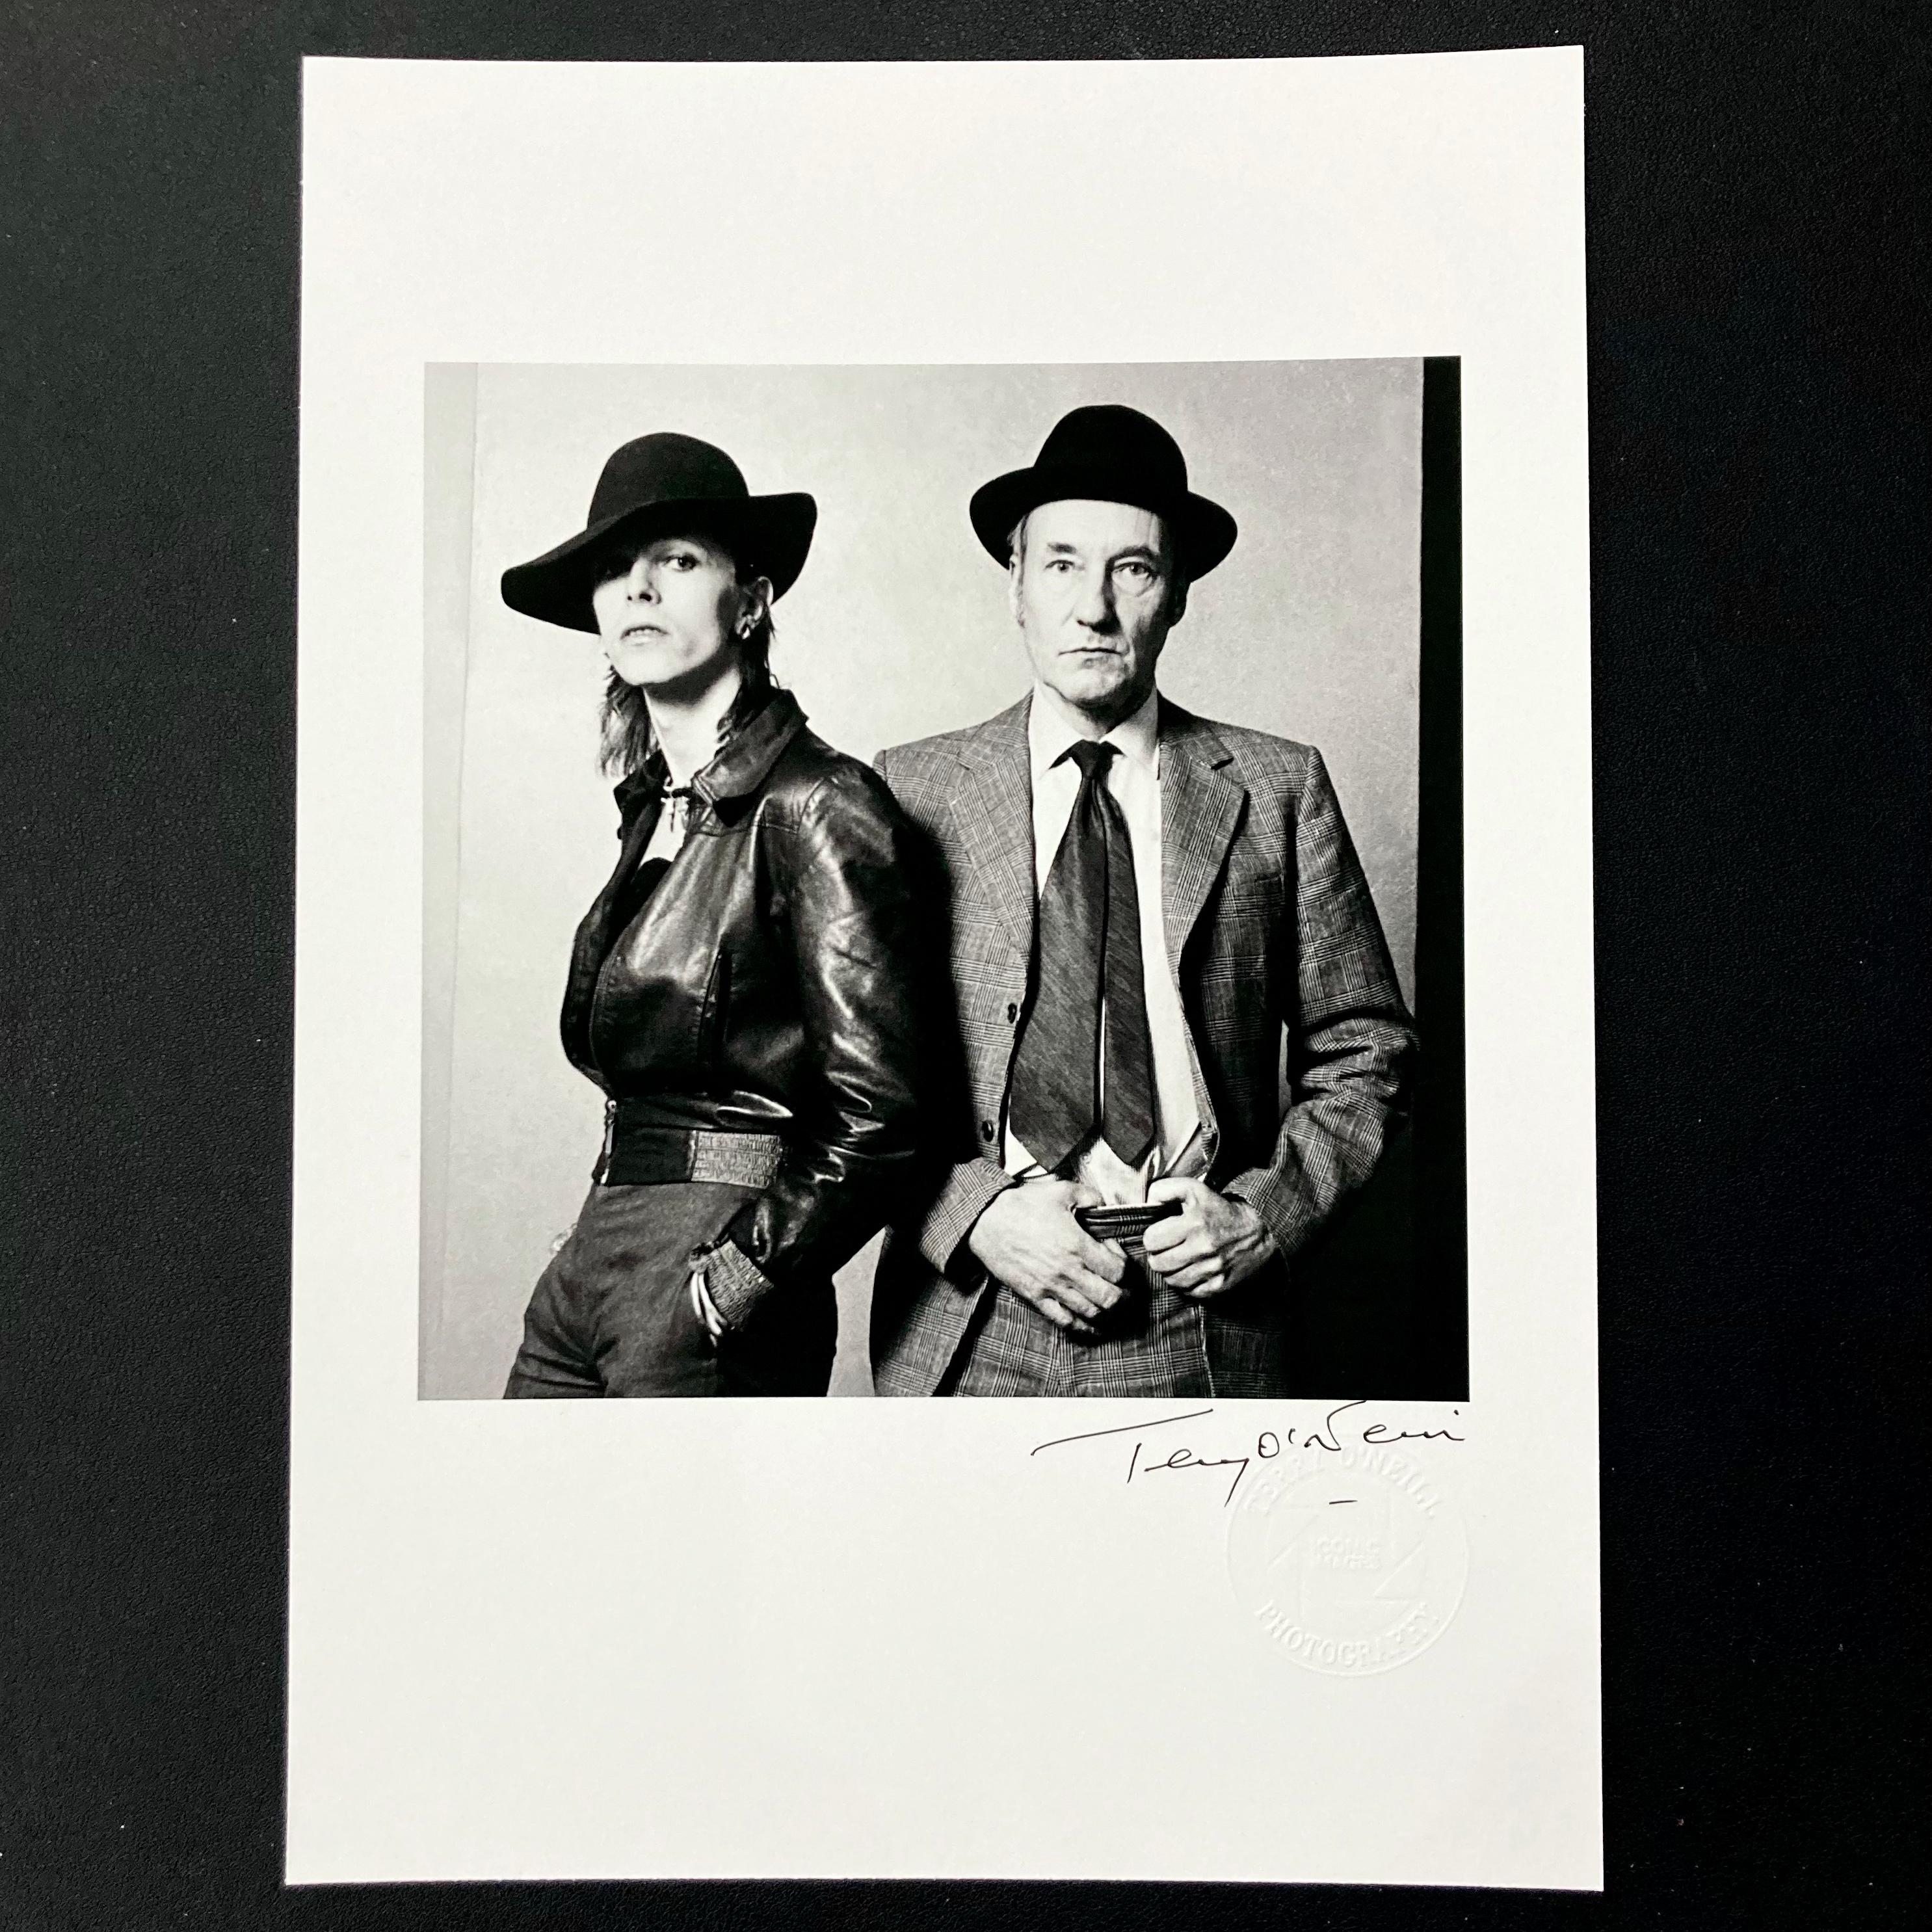 Signed open edition, 8” x 10” archival print of David Bowie and William Burroughs by Terry O'Neill, featuring Terry O’Neill’s embossed studio stamp

On 28 February 1974, Rolling Stone magazine published a remarkable interview between rock icon David